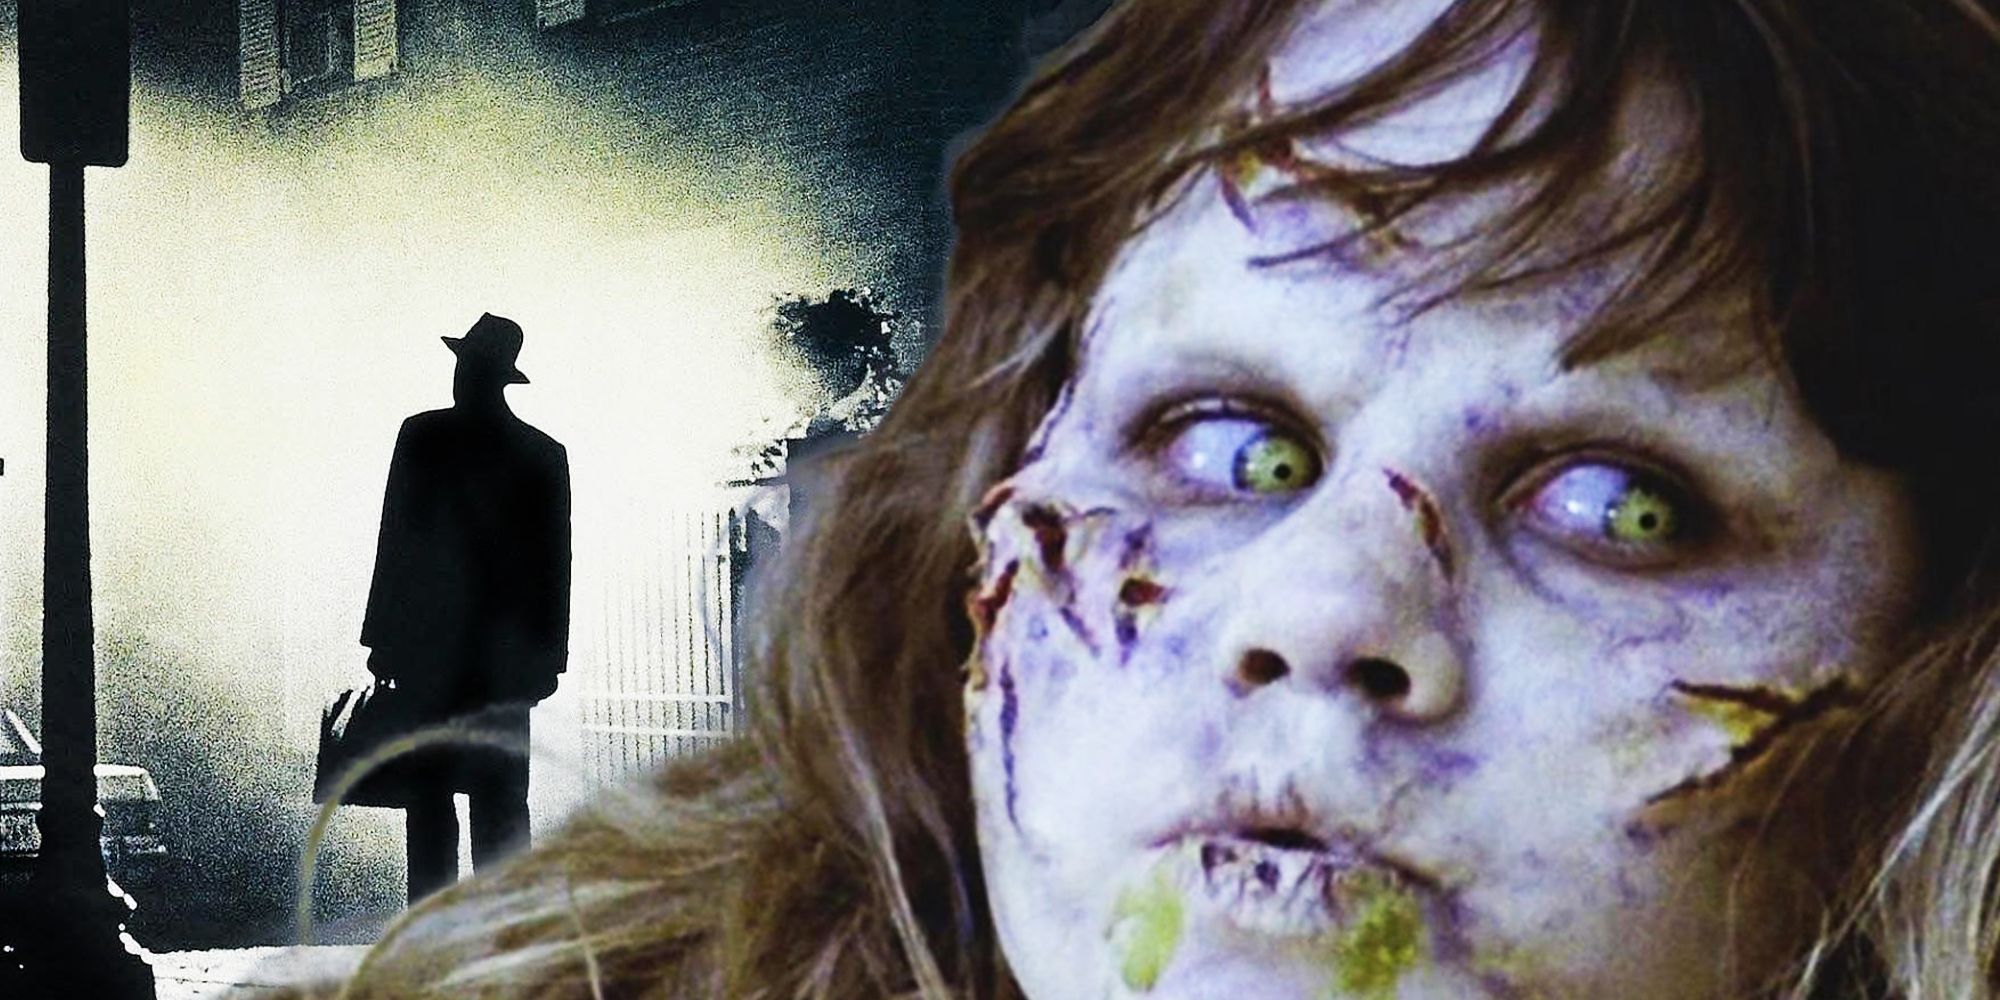 How Scary Is The Original Exorcist Movie Today?